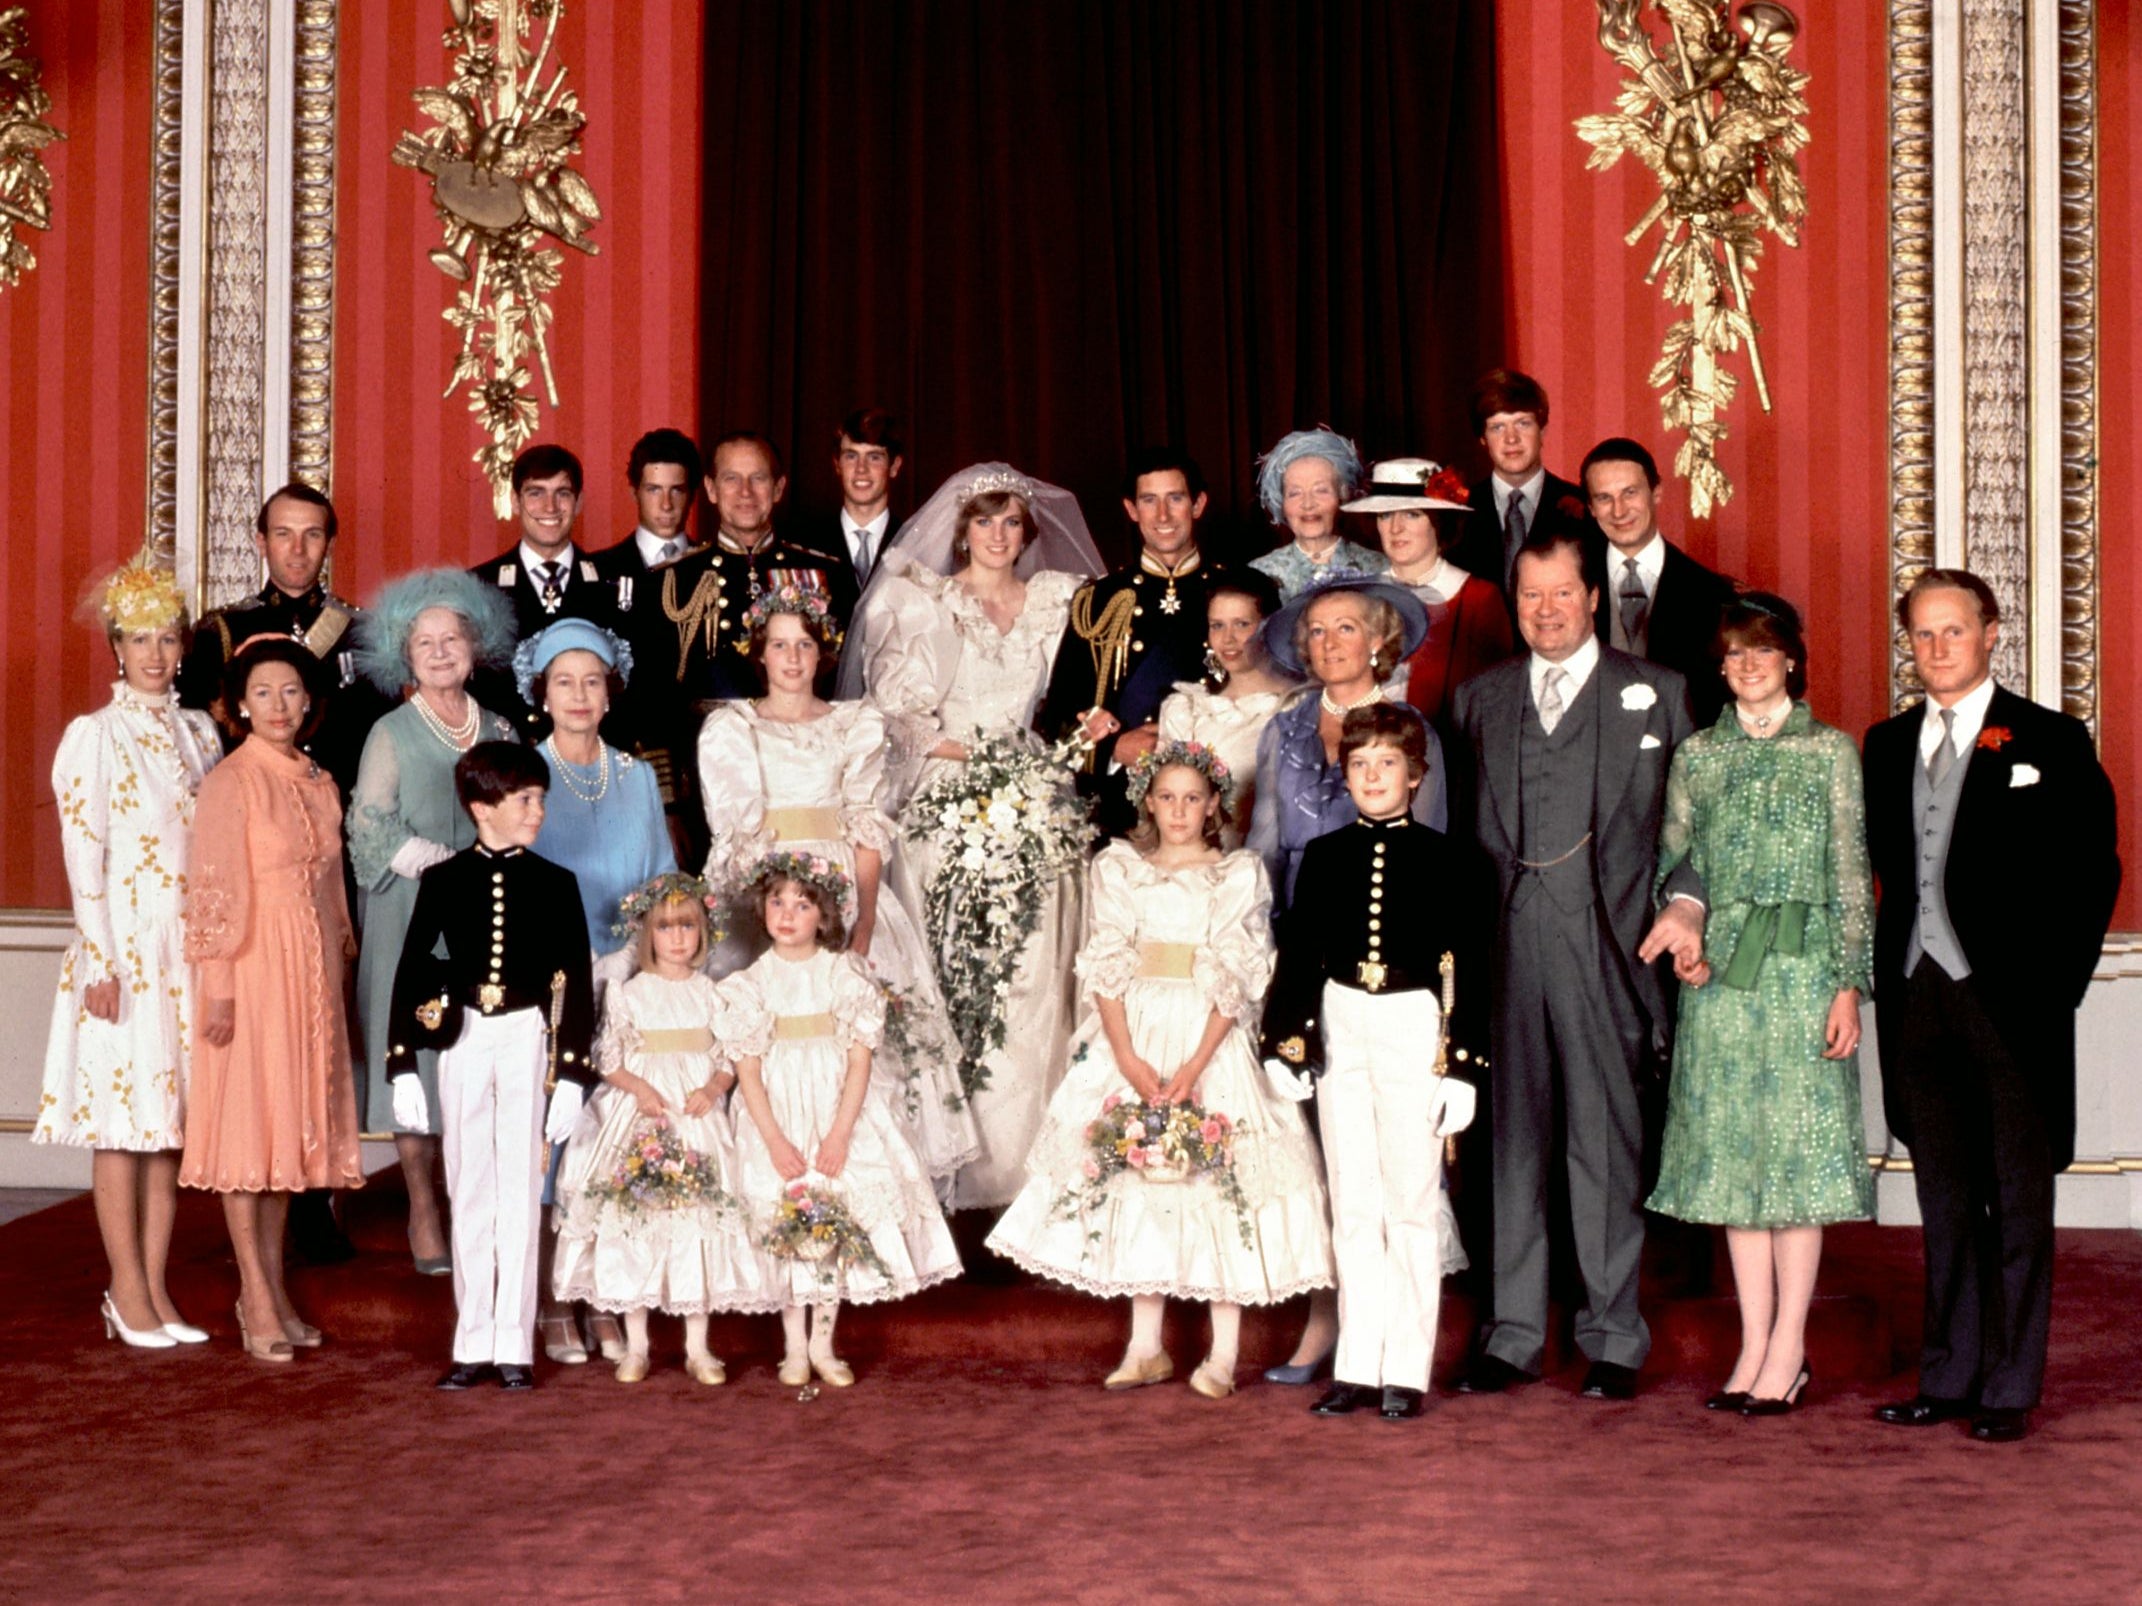 An official family photo taken on 29 July 1981, the wedding day of Prince Charles (C-R) and Lady Diana (C-L), the Princess of Wales